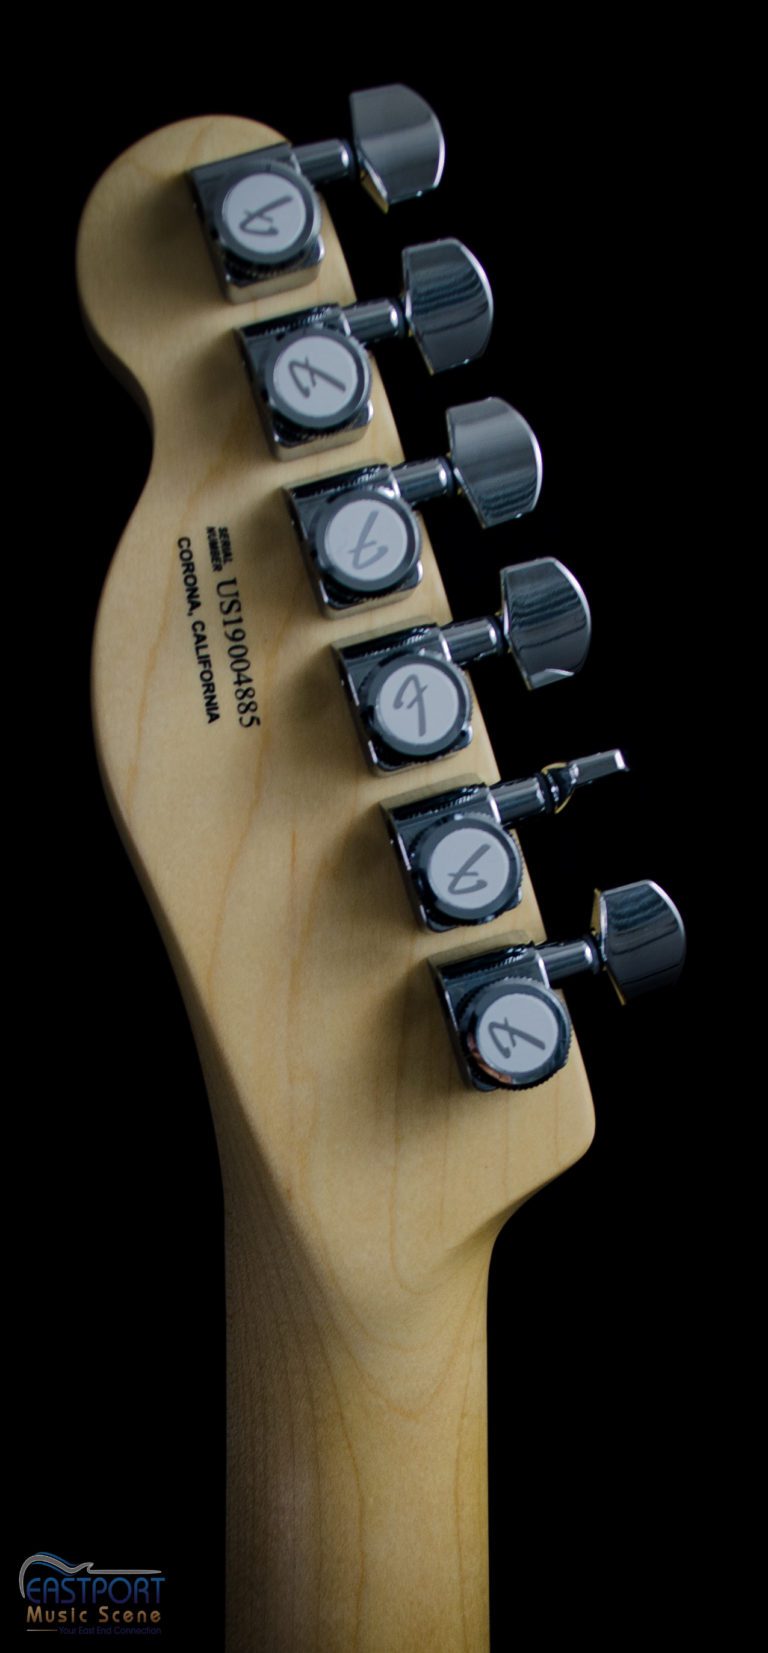 A guitar with four different tuning knobs.